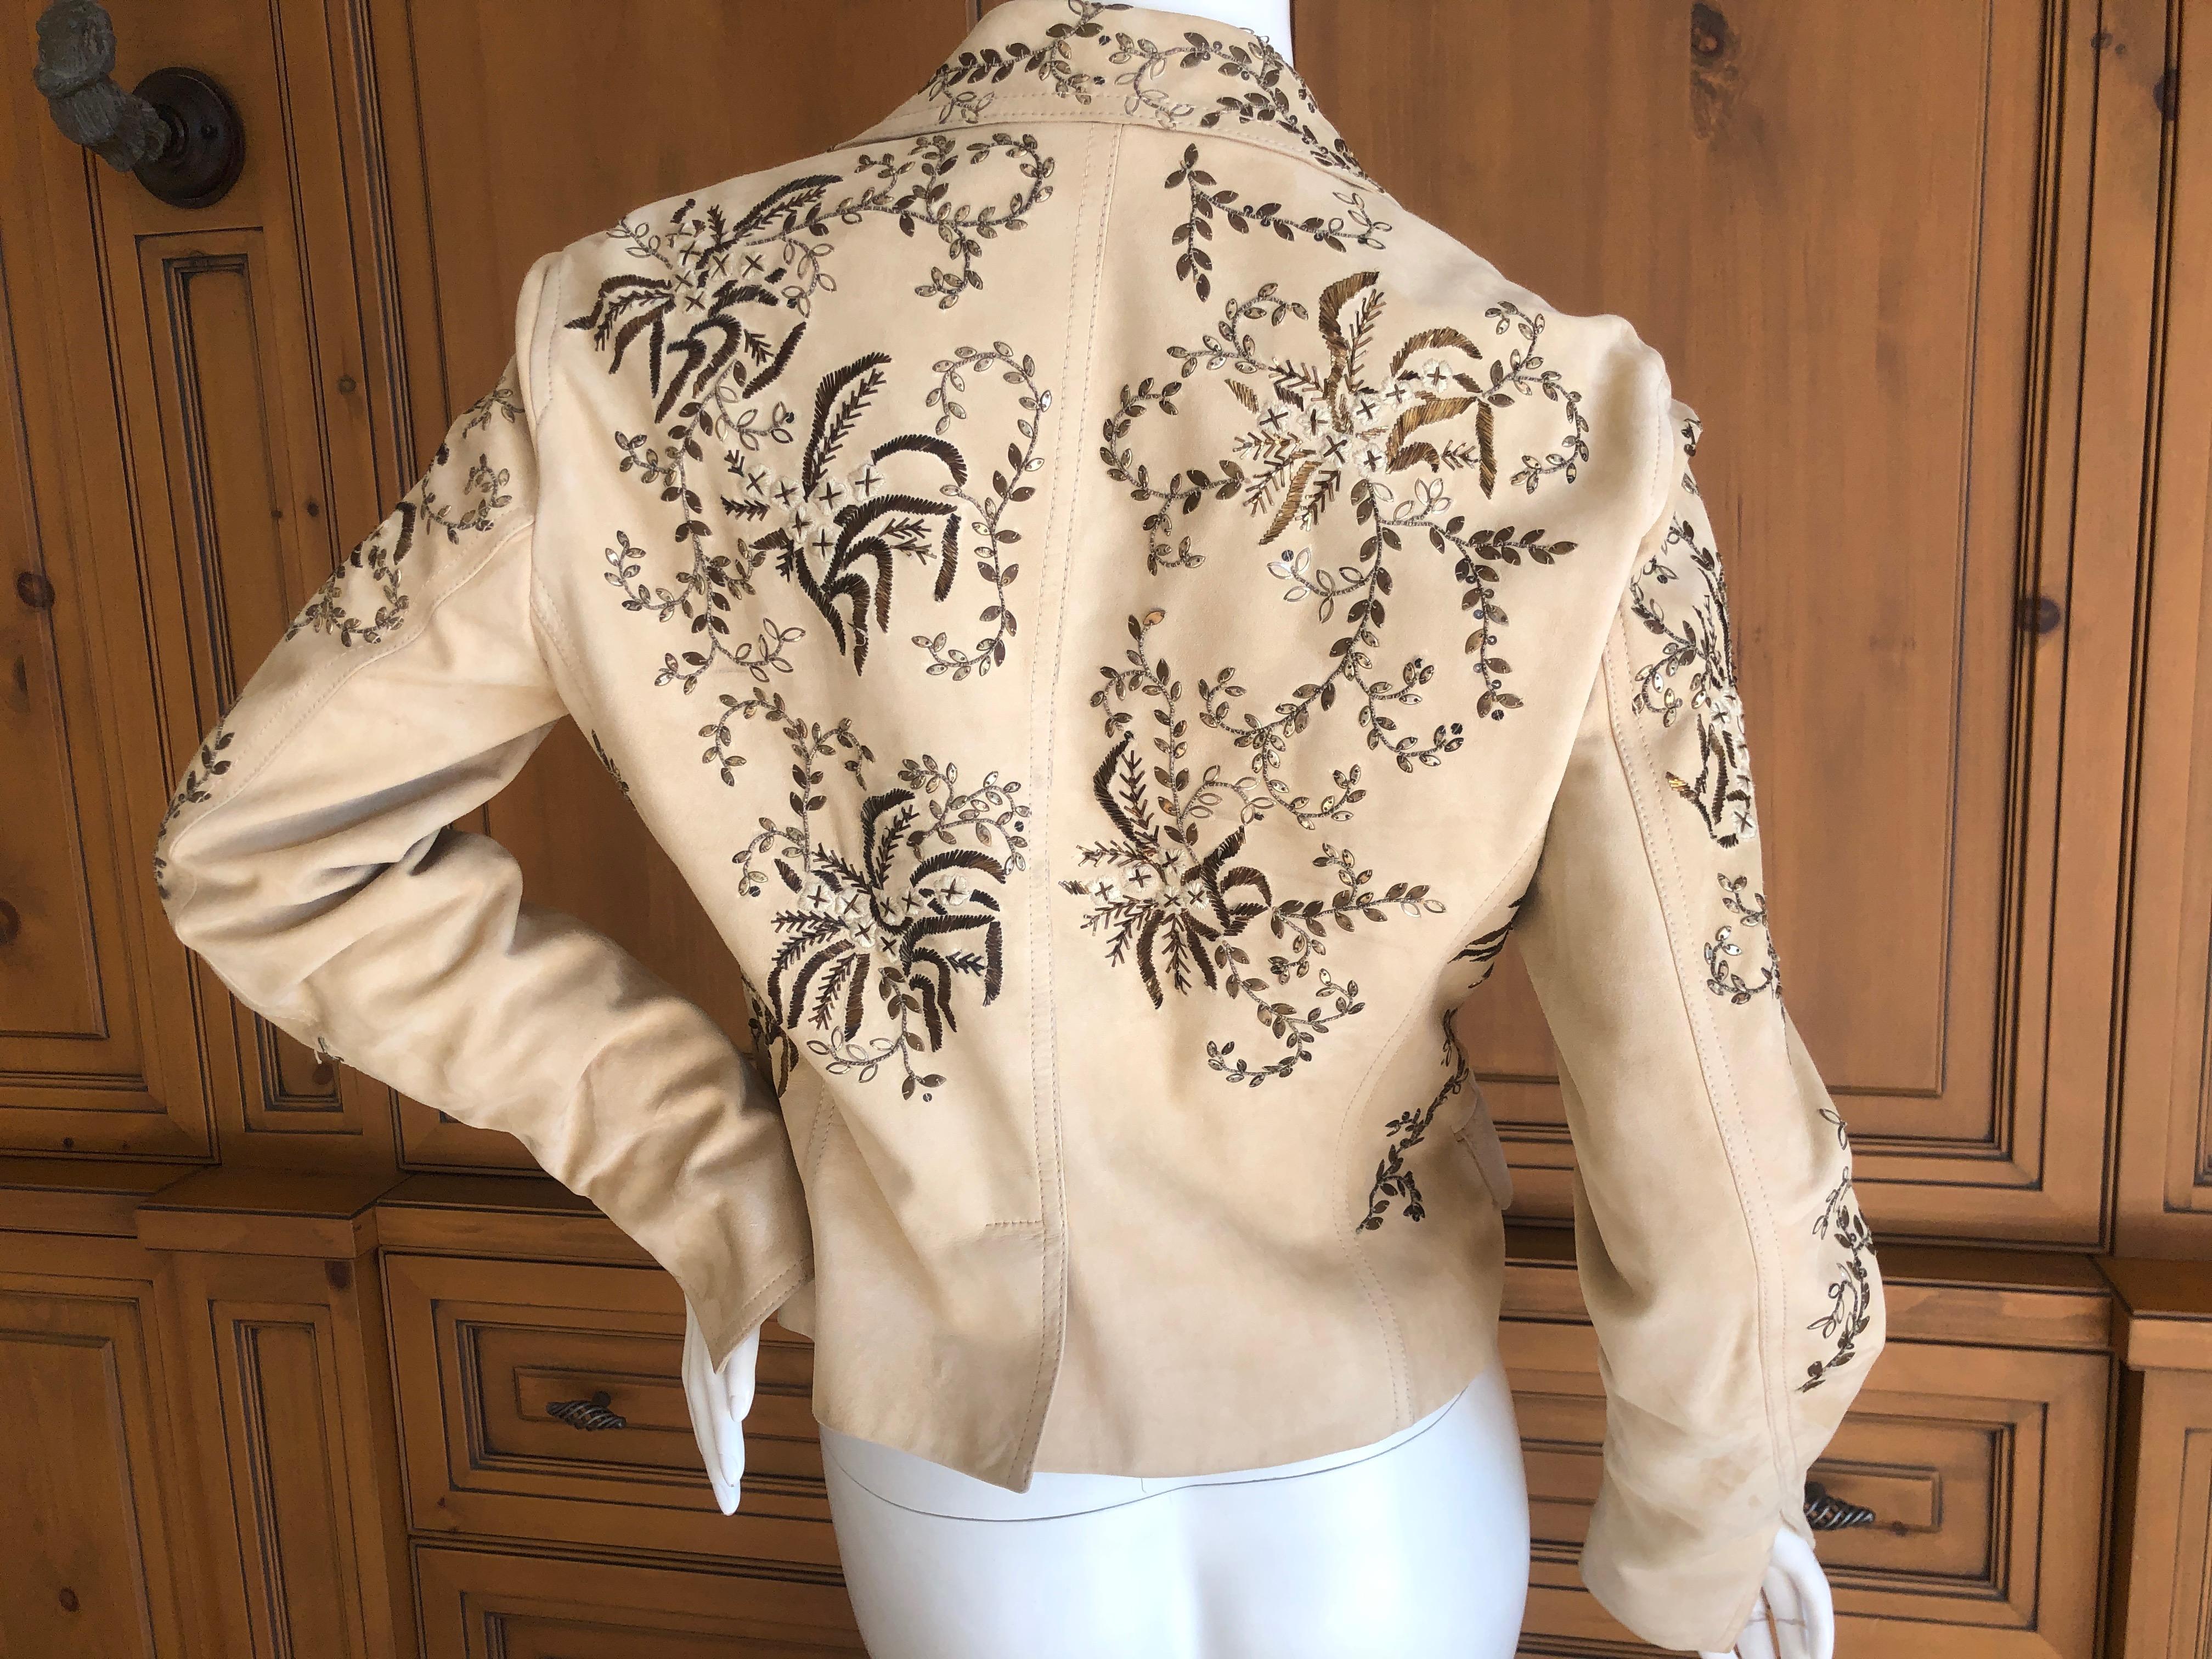 John Galliano Vintage Buff Suede Jacket with Metalwork Embroidery Details im Angebot 1